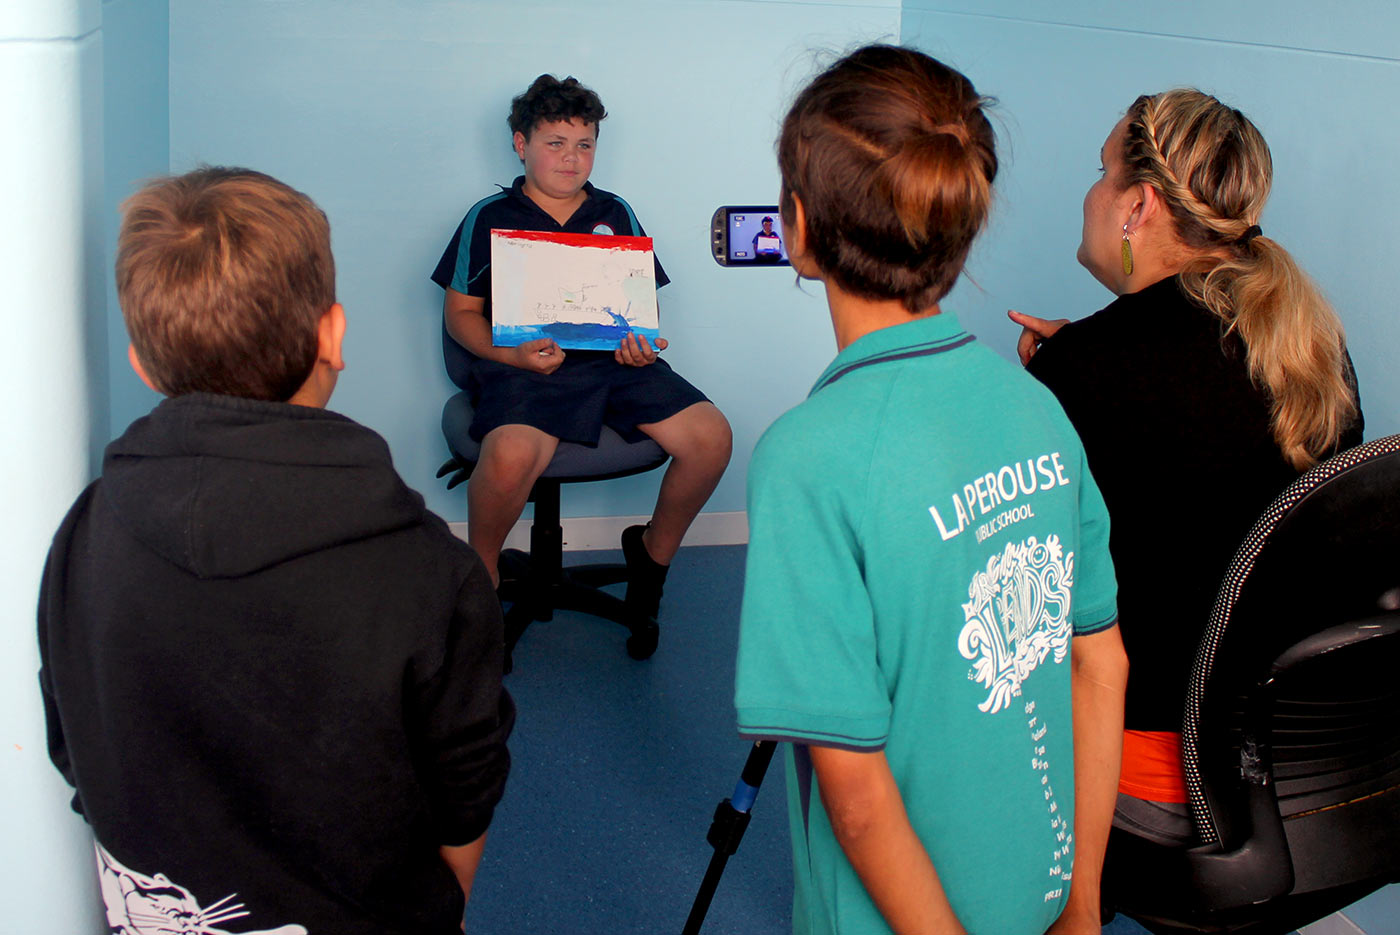 A boy in a school uniform being filmed presenting his painting while two other students and a female interviewer watch on.. - click to view larger image